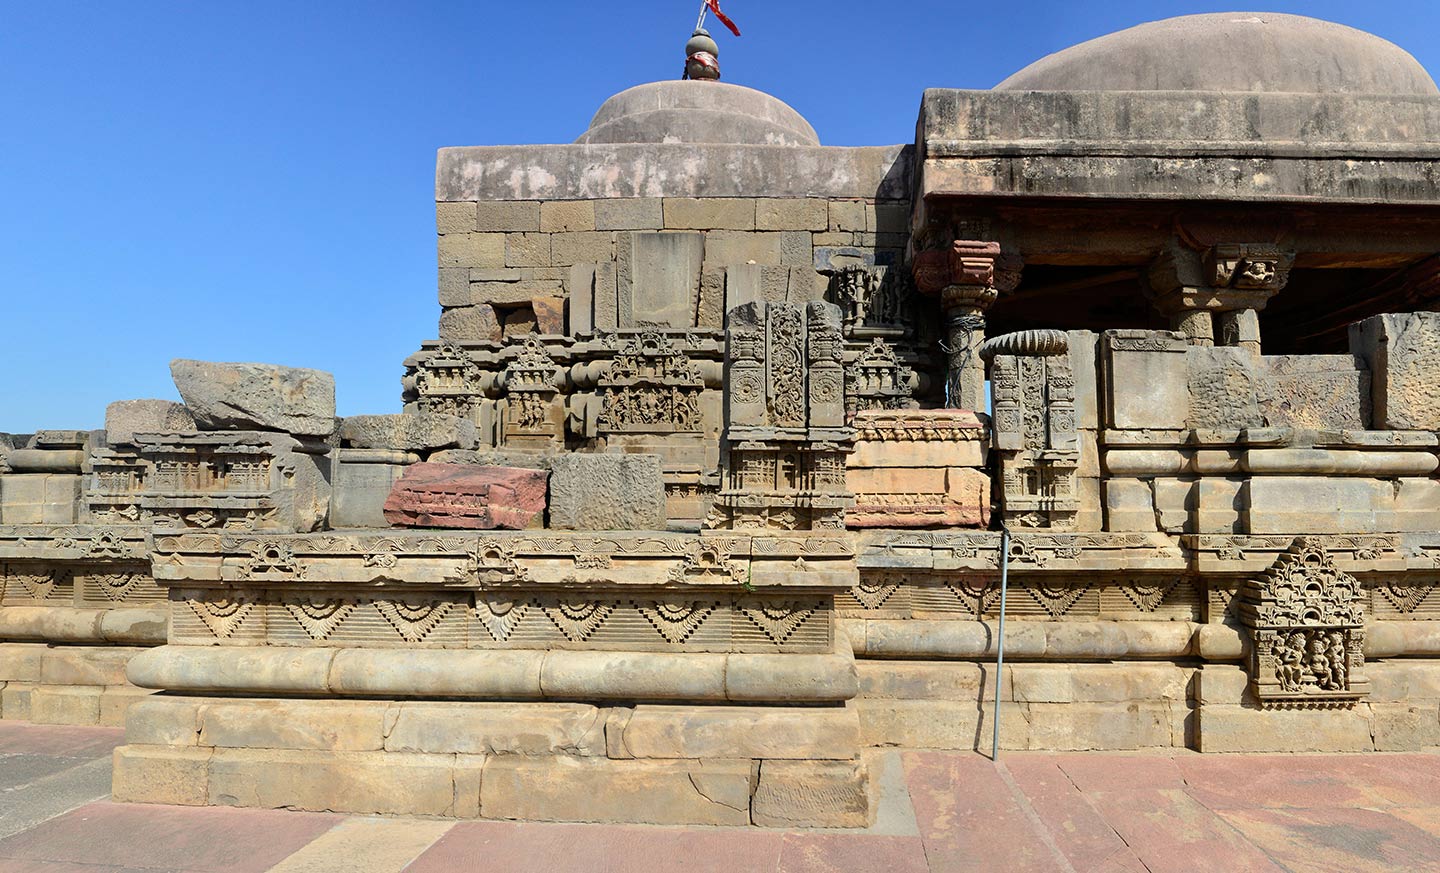 The space in front of the garbhagriha (sanctum sanctorum) is the maha mandapa which is used as a congregation space and for conducting rituals. A pradakshina (circumambulation path) goes around the garbhagriha and the mahamadapa. Instead of the traditional shikhara, the temple was reconstructed with a dome by the Archaeology Department of the erstwhile Jaipur State in the 1940s.